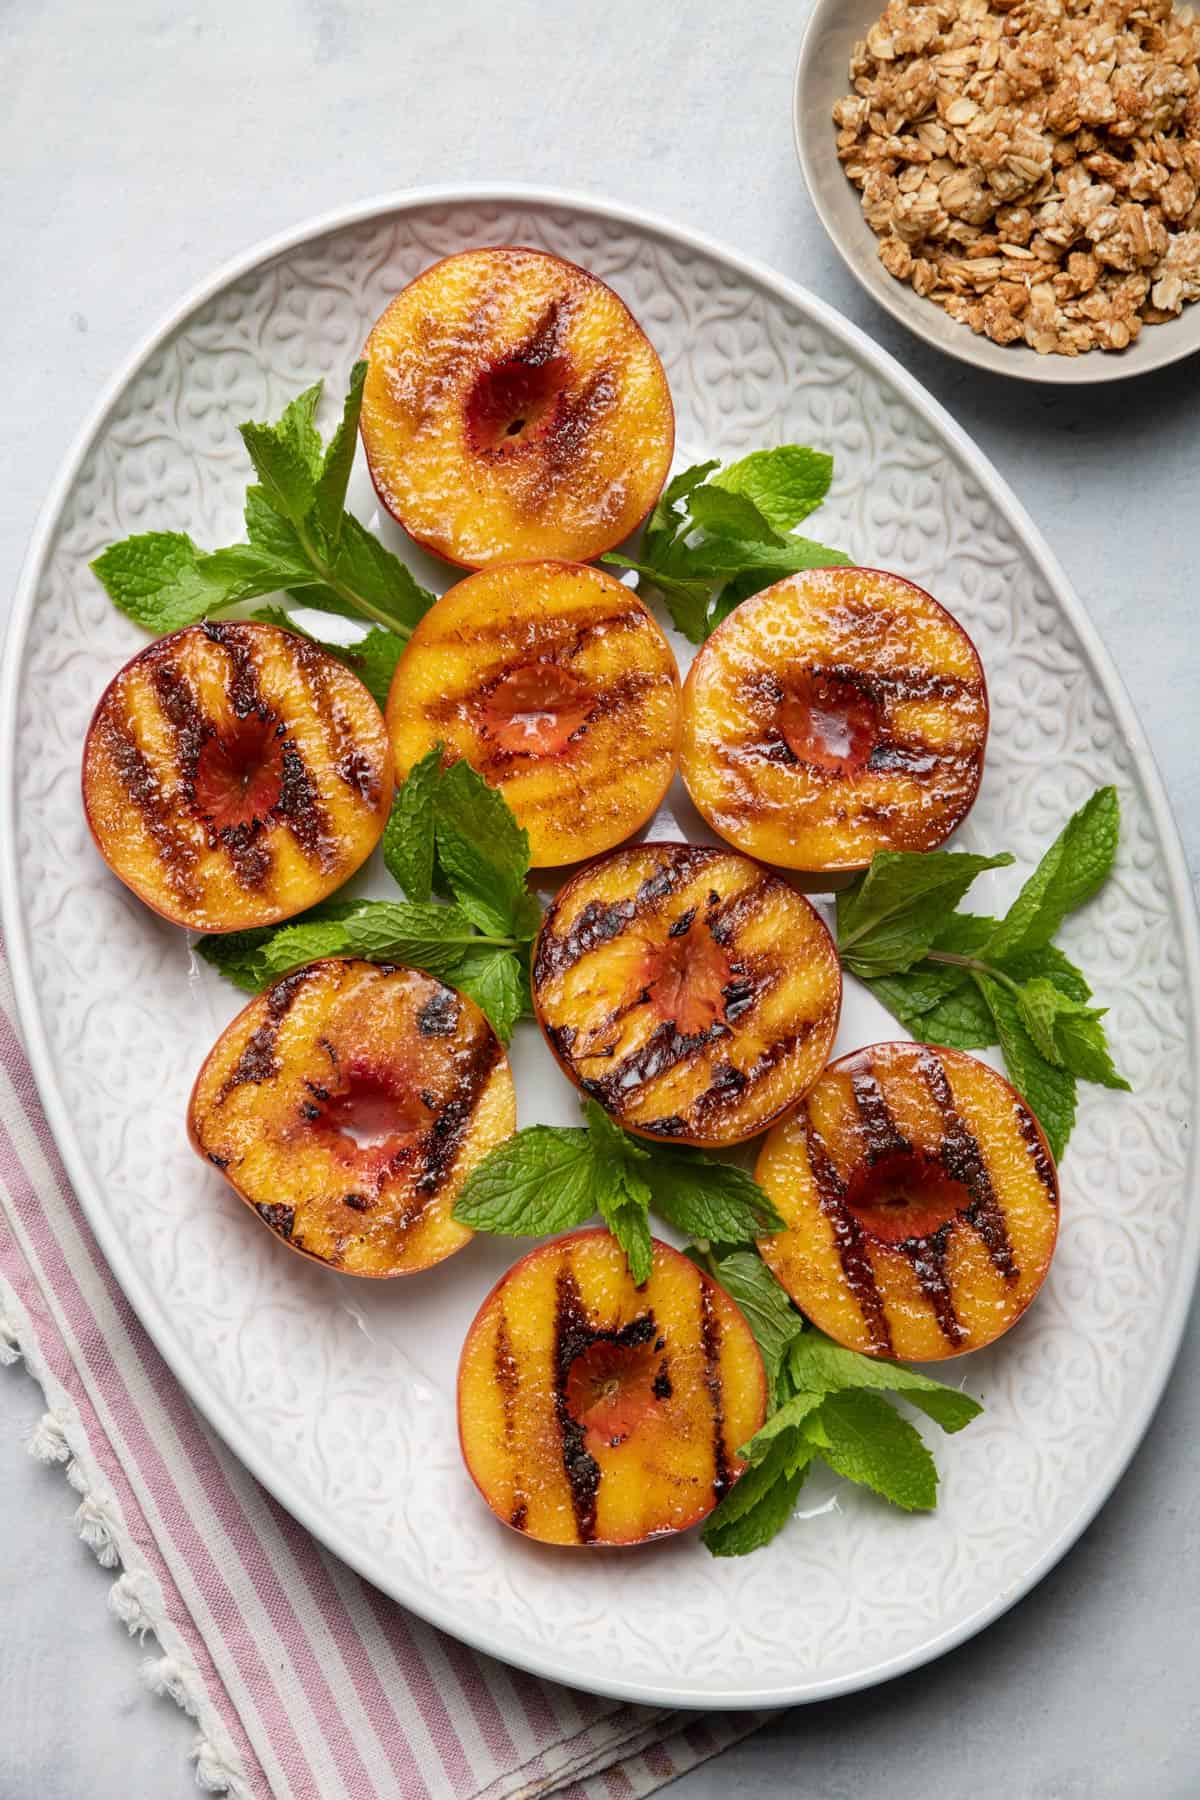 Platter of grilled peaches served with fresh mint and granola on the side